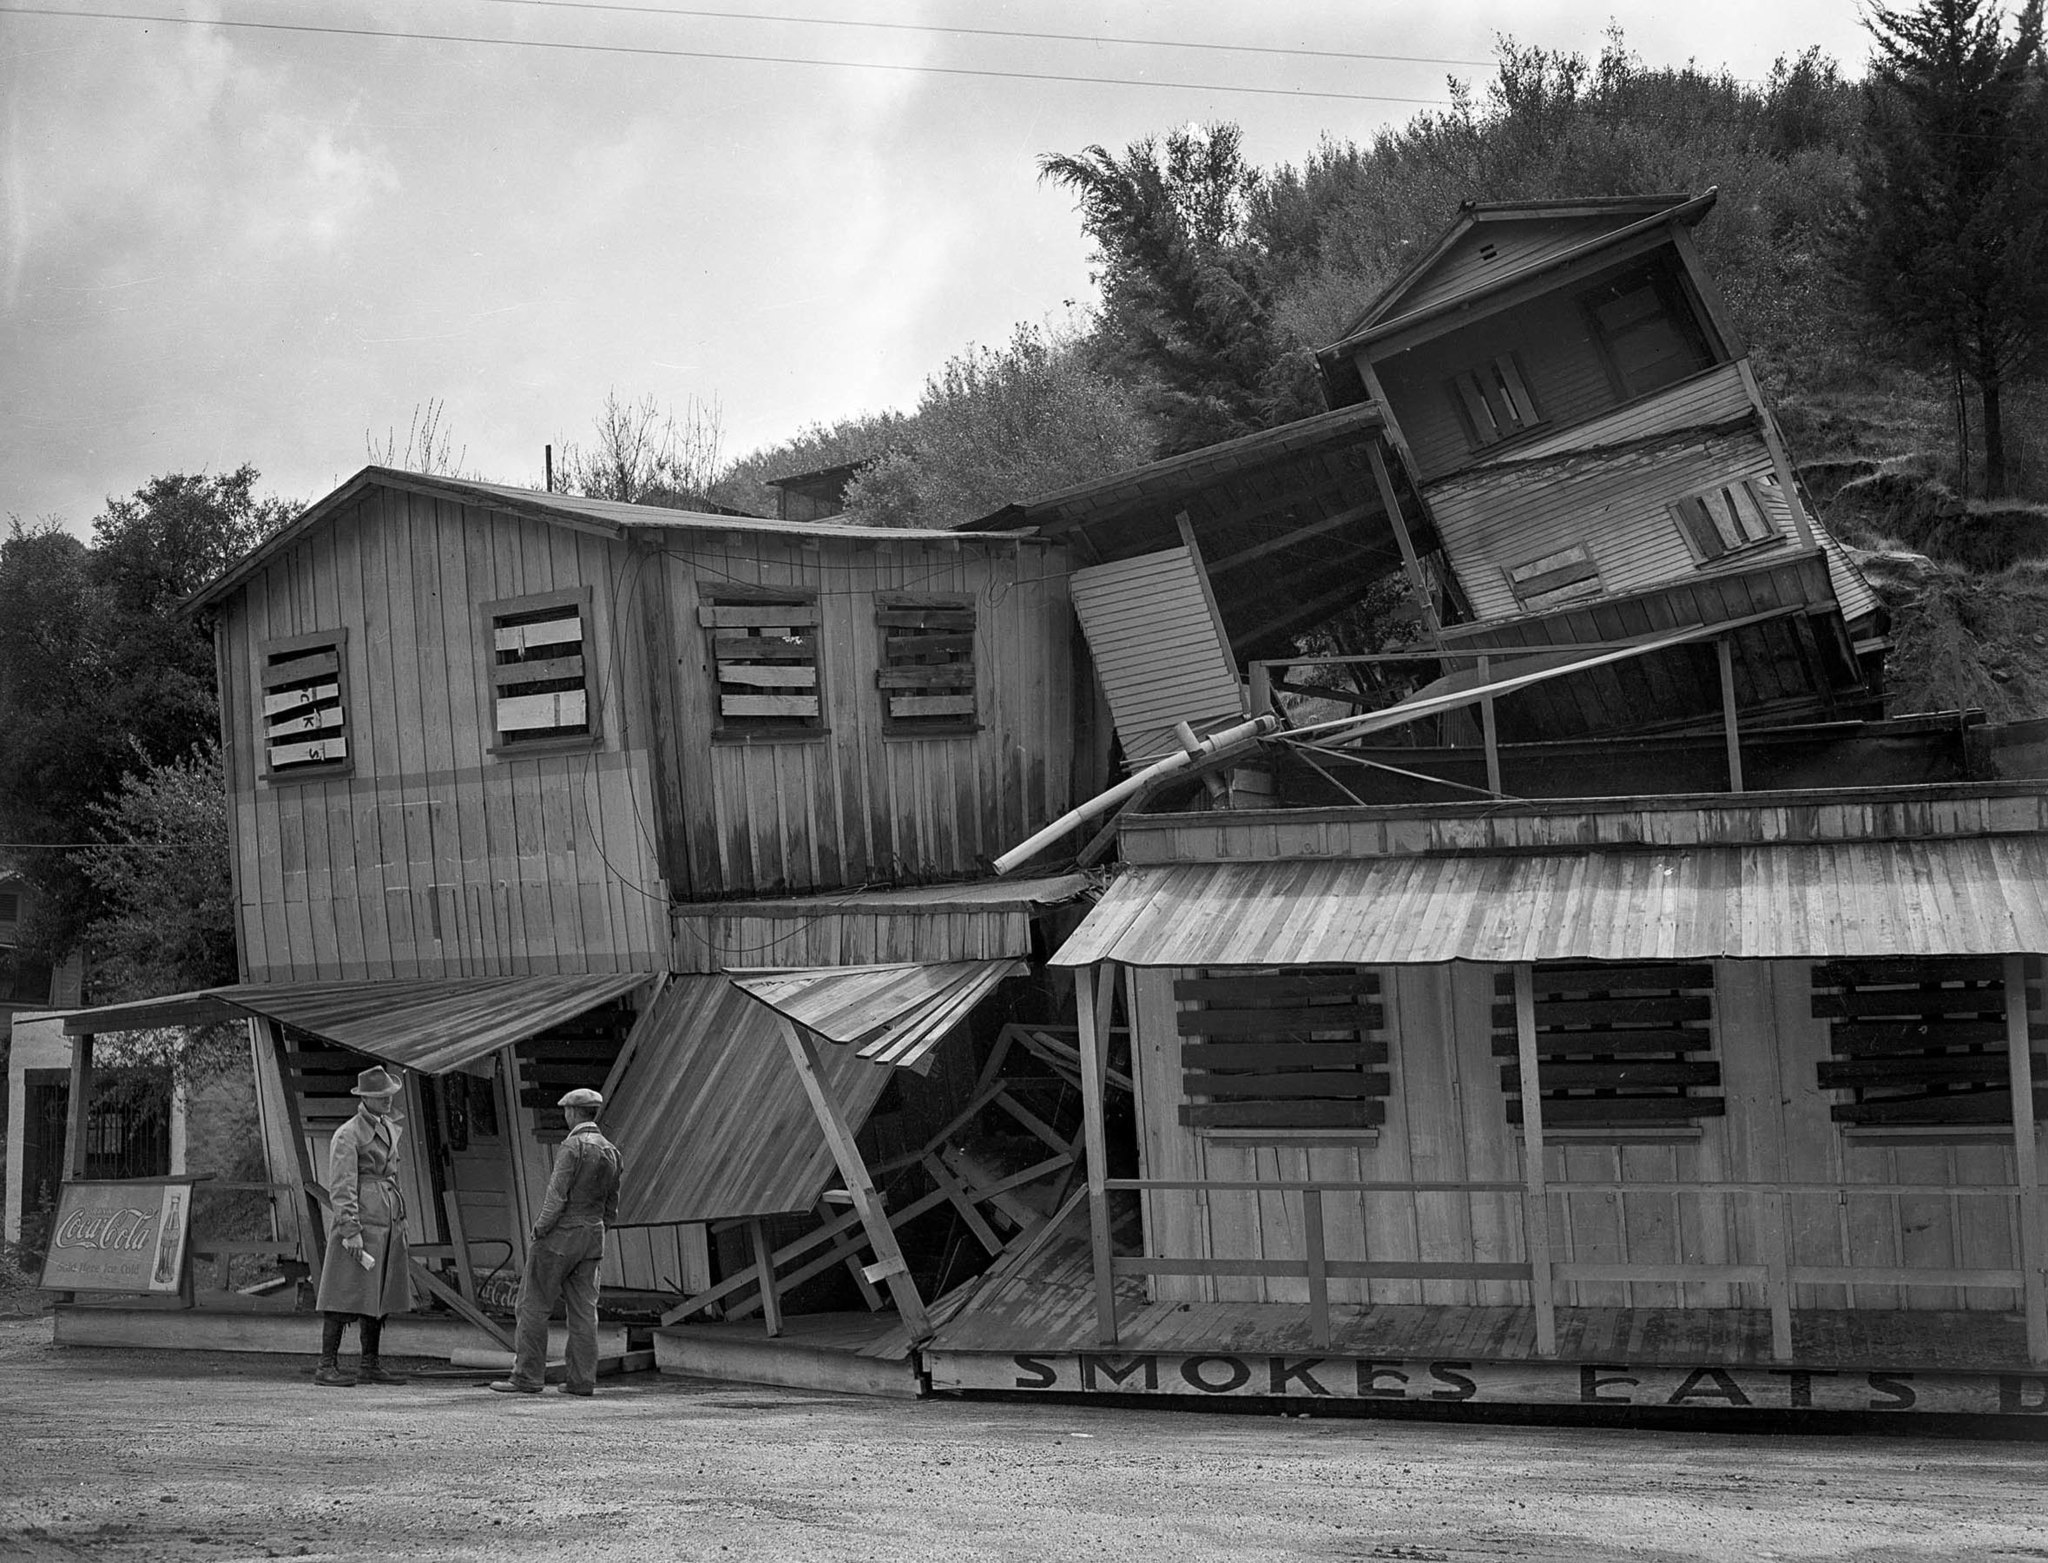 March 1, 1938: A three story structure once occupied by cafe at Cheeney Road and Topanga Canyon Road